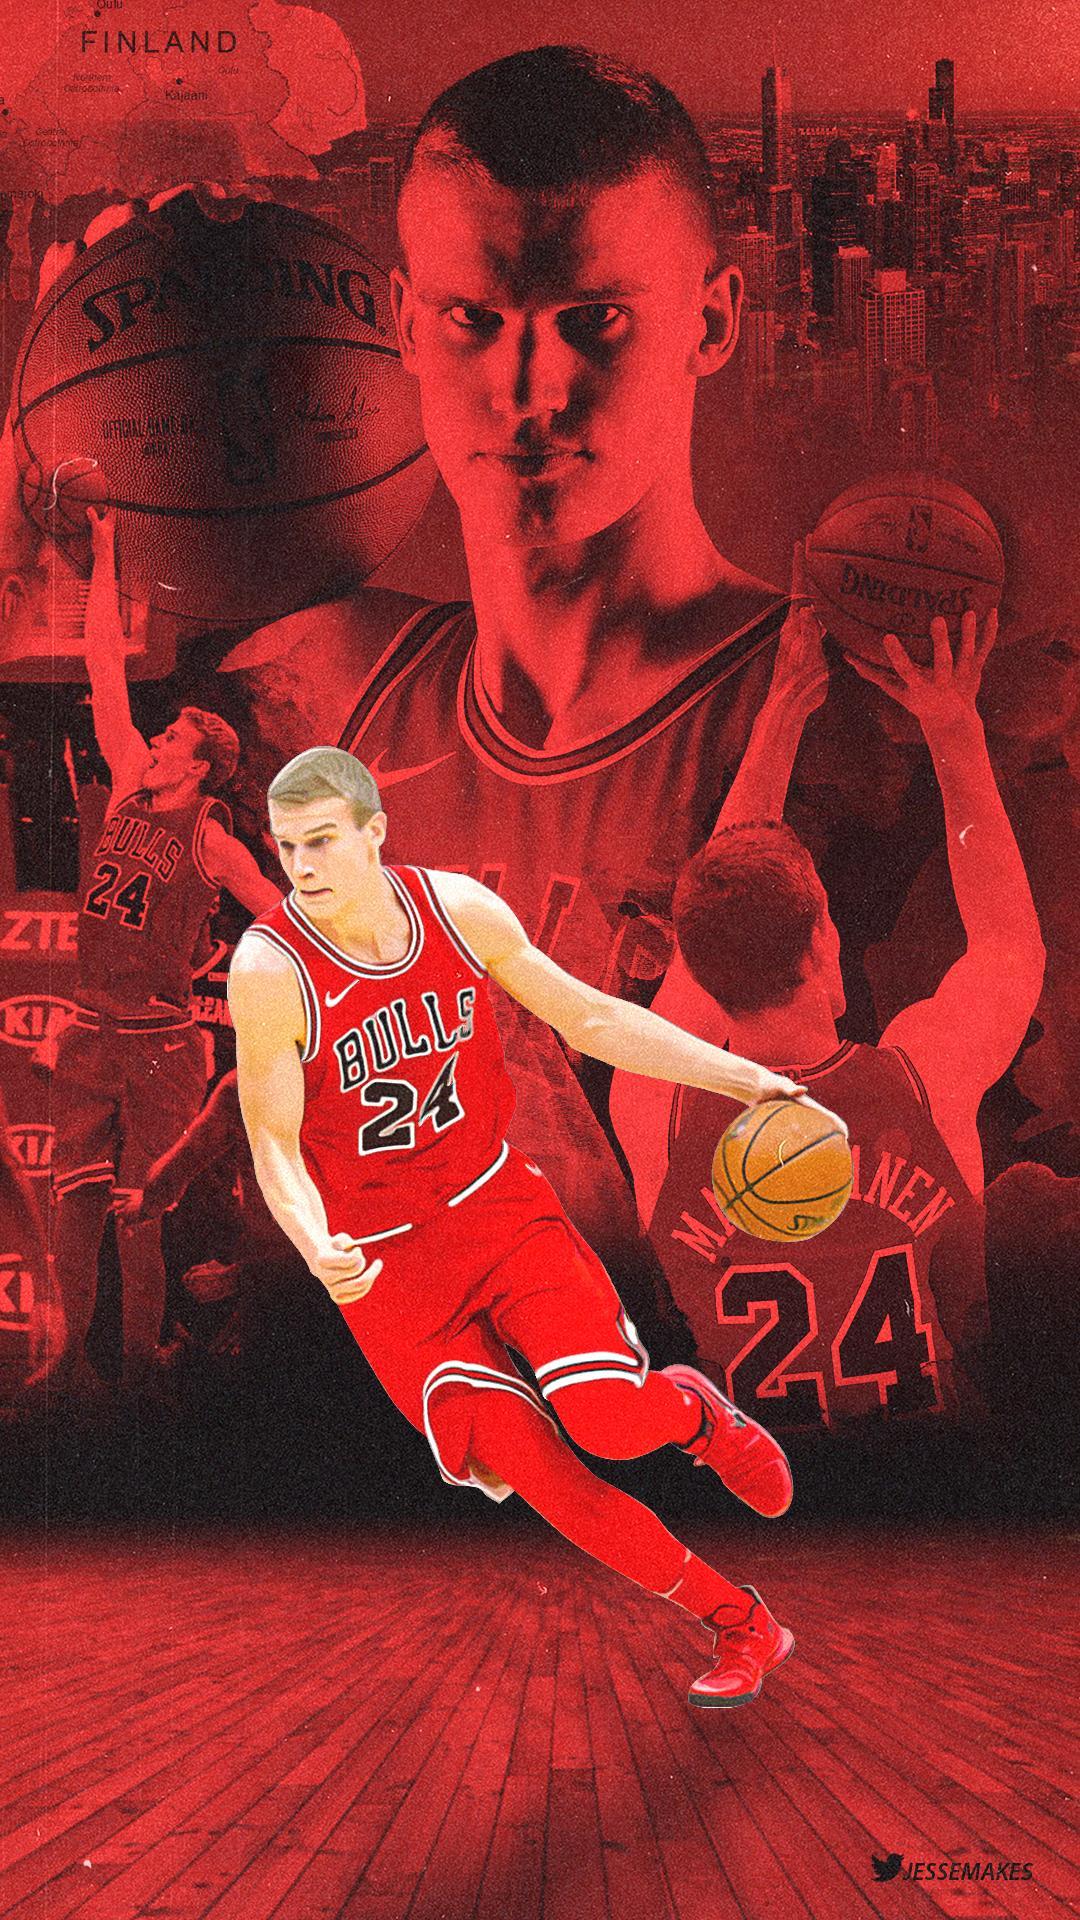 I appreciate Lauri so I made a wallpaper. Thought I'd share it here